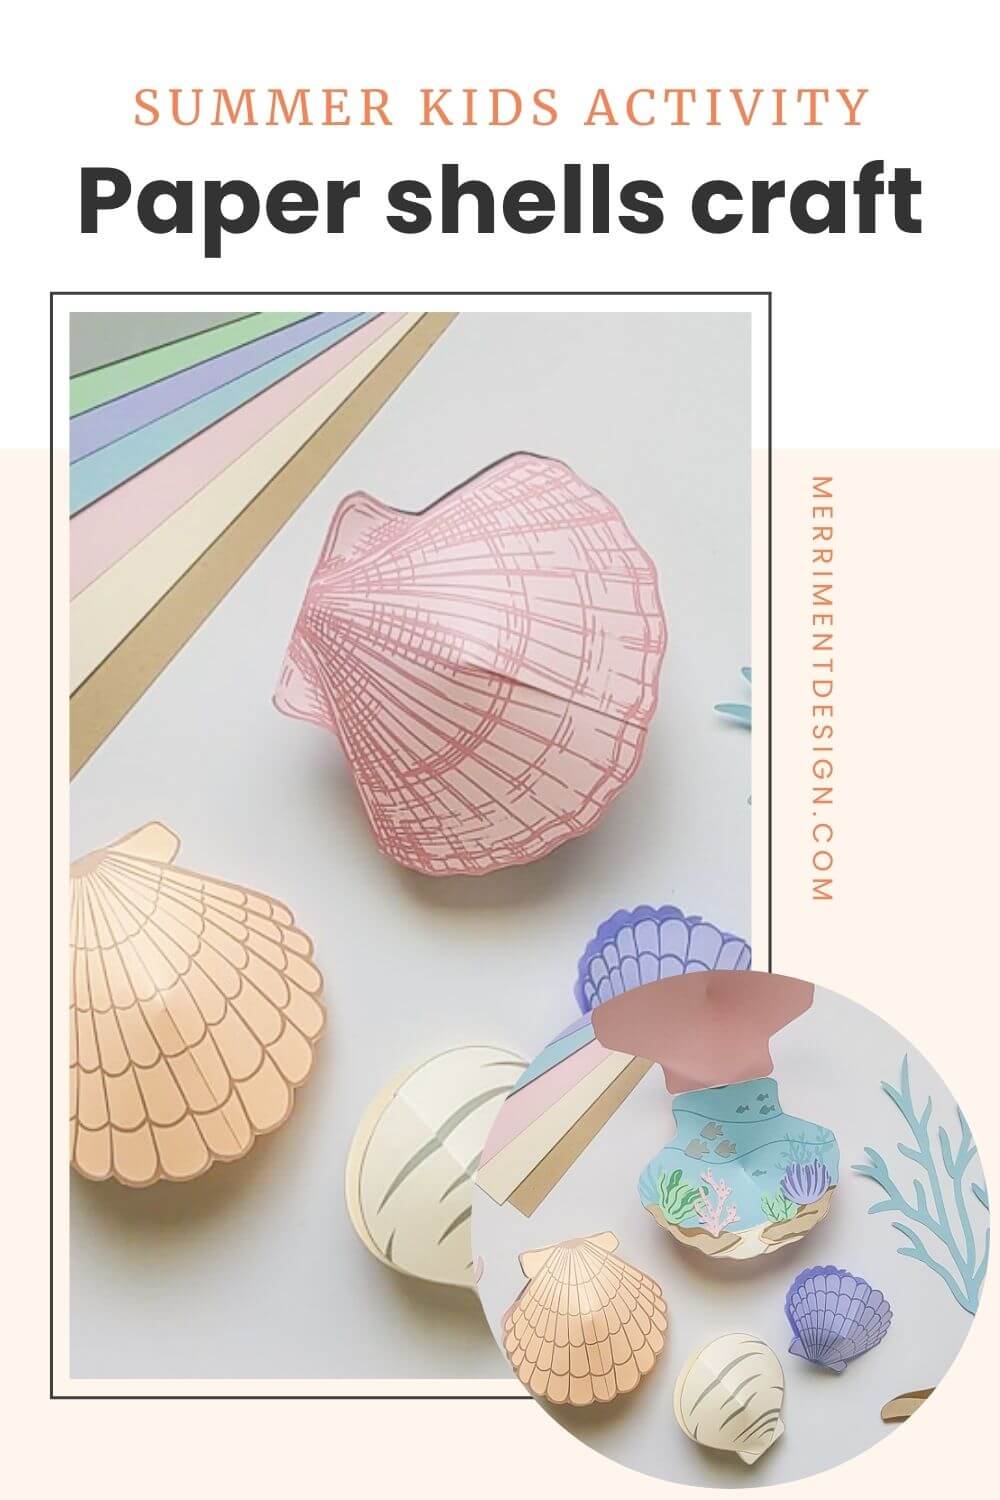 Paper seashells summer craft project for kids